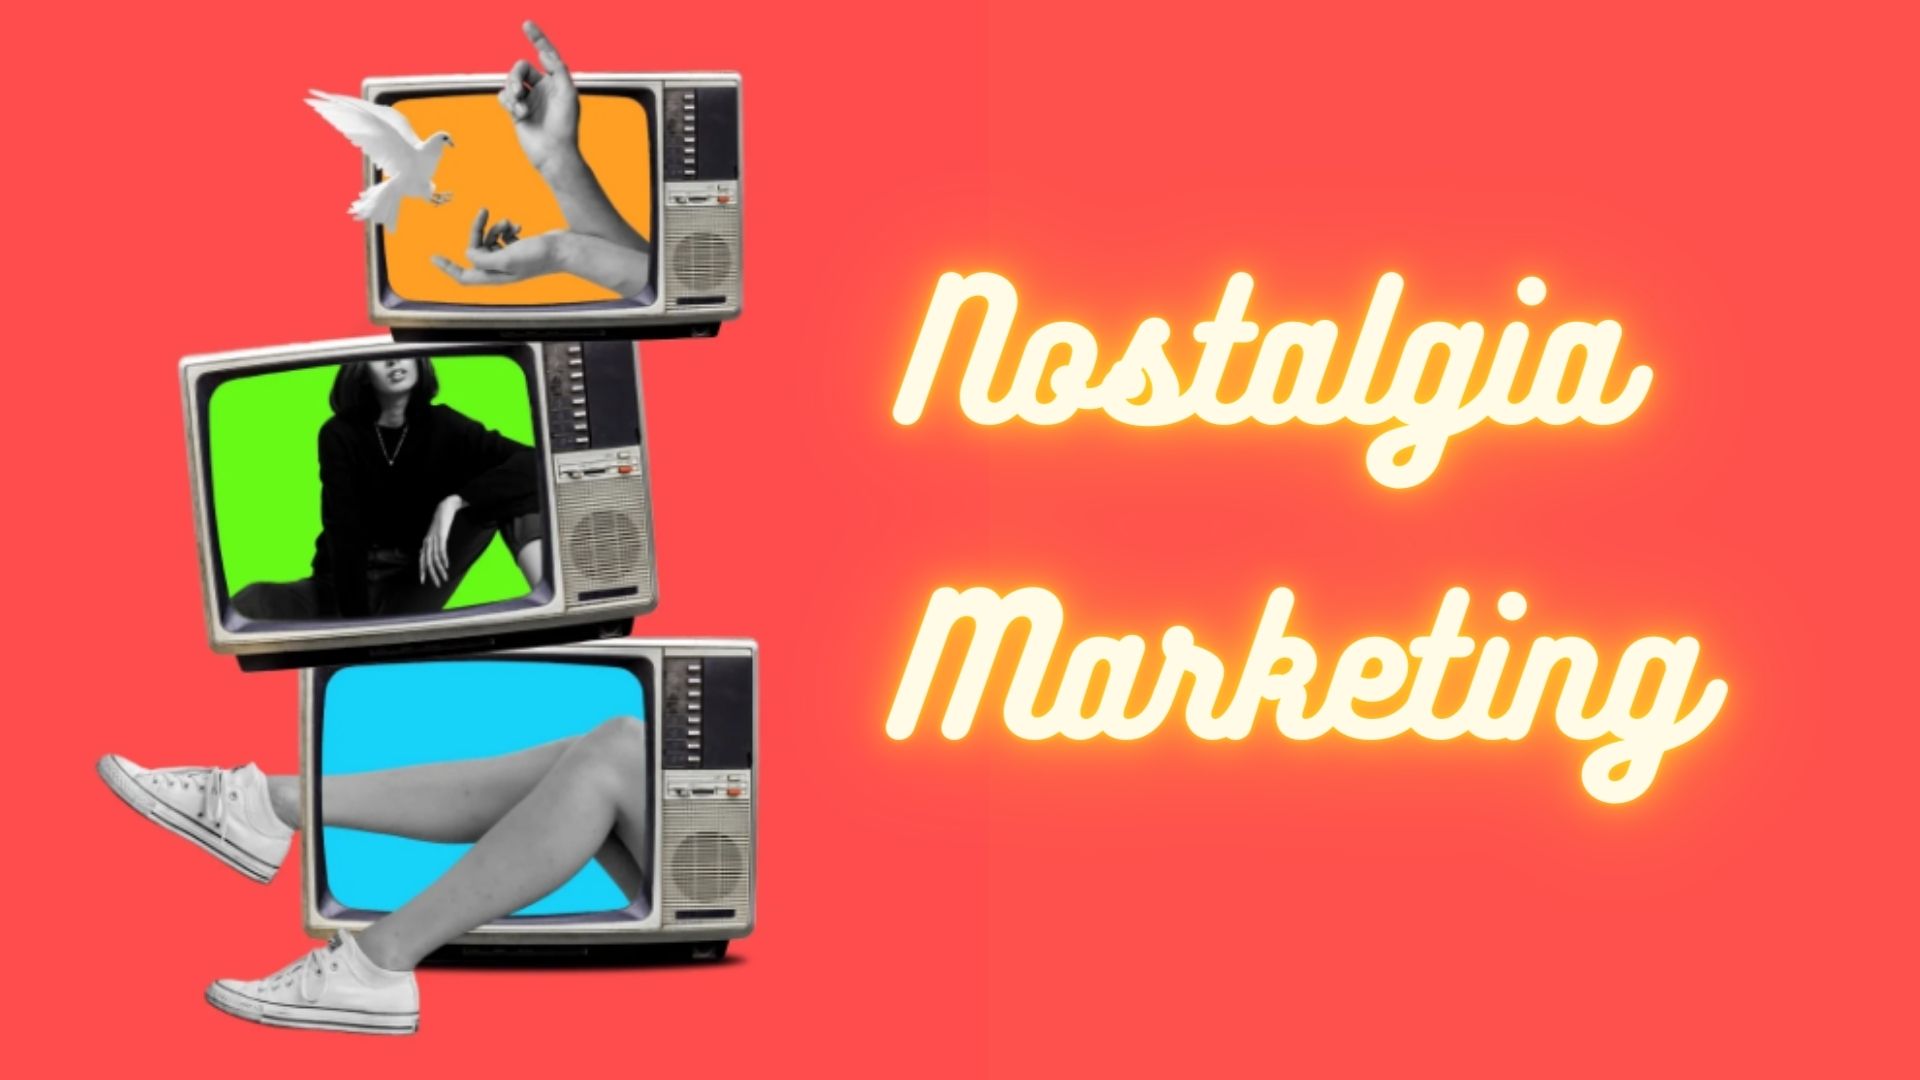 Read more about the article Nostalgia Marketing